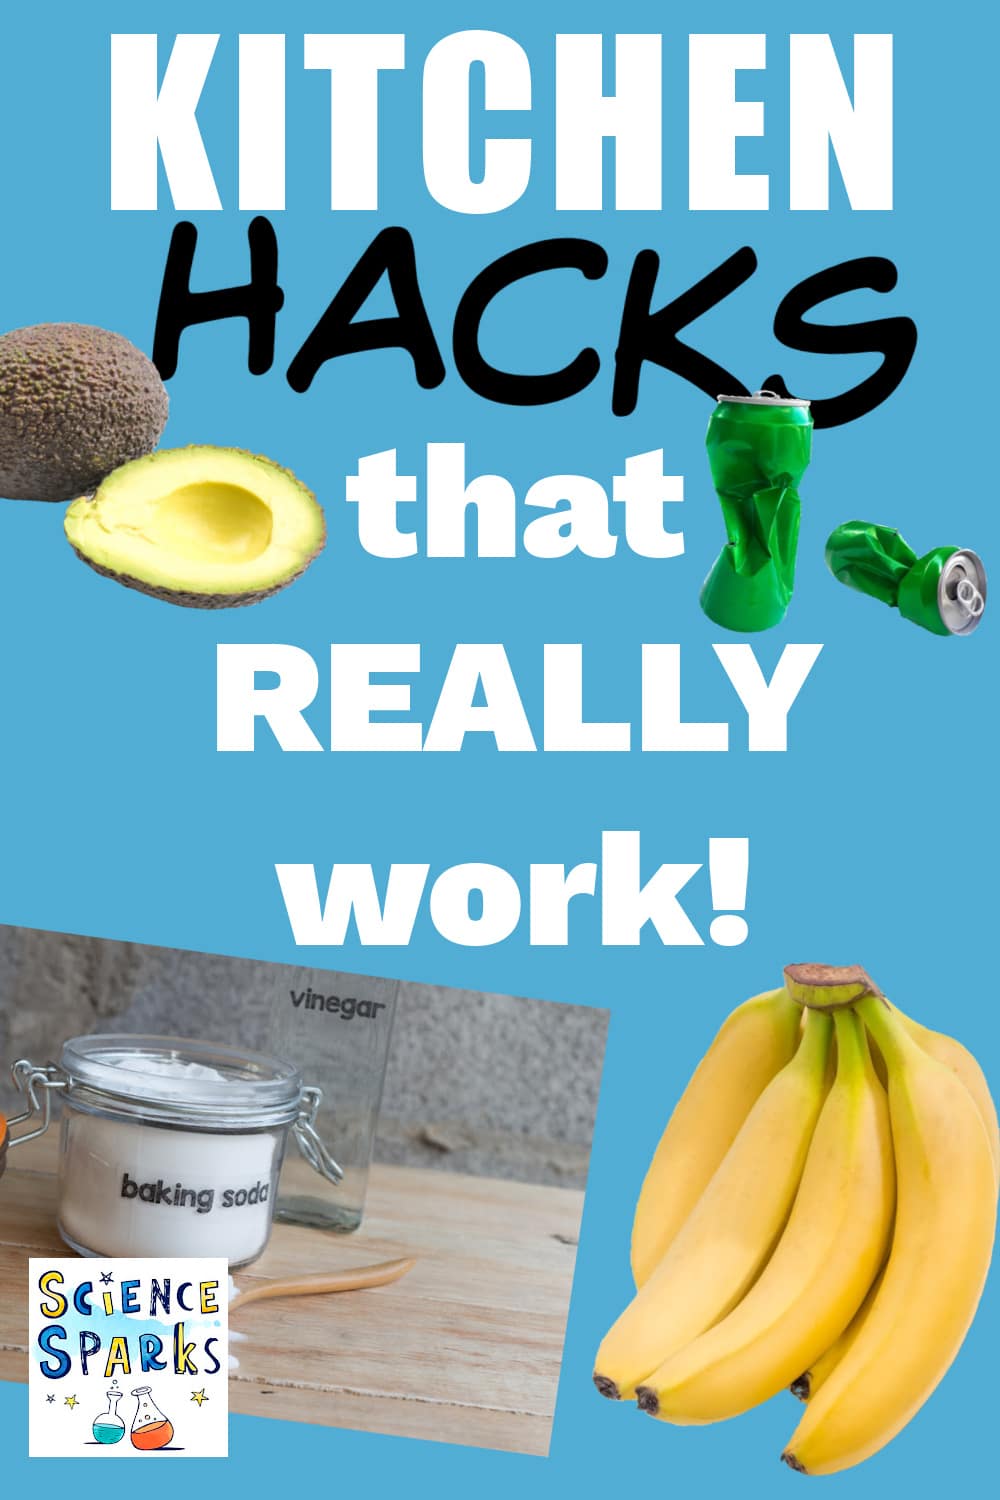 Science kitchen hacks that really work